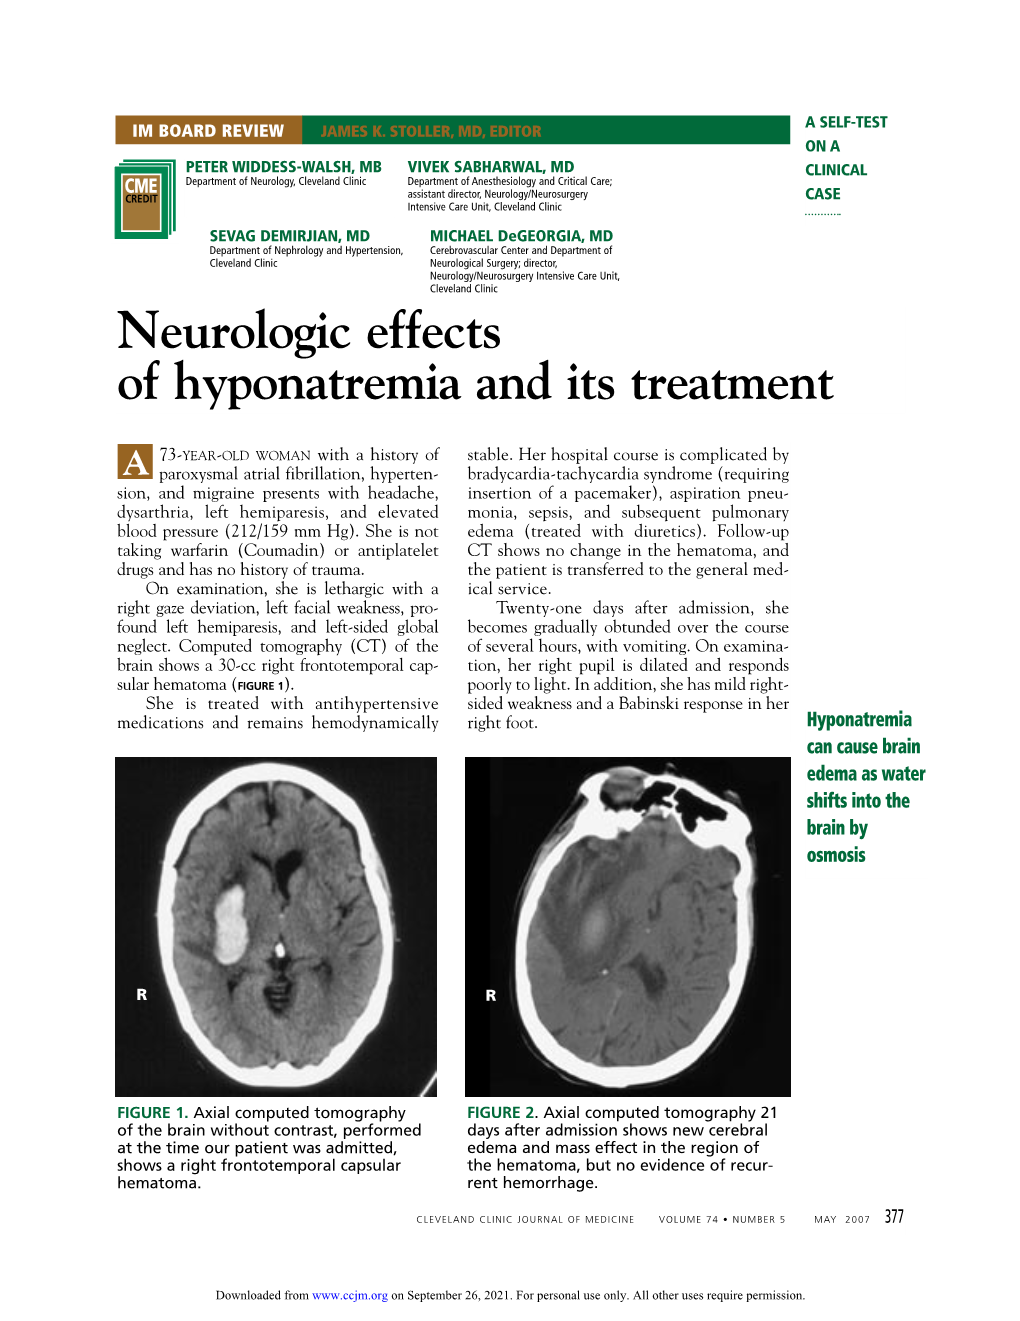 Neurologic Effects of Hyponatremia and Its Treatment